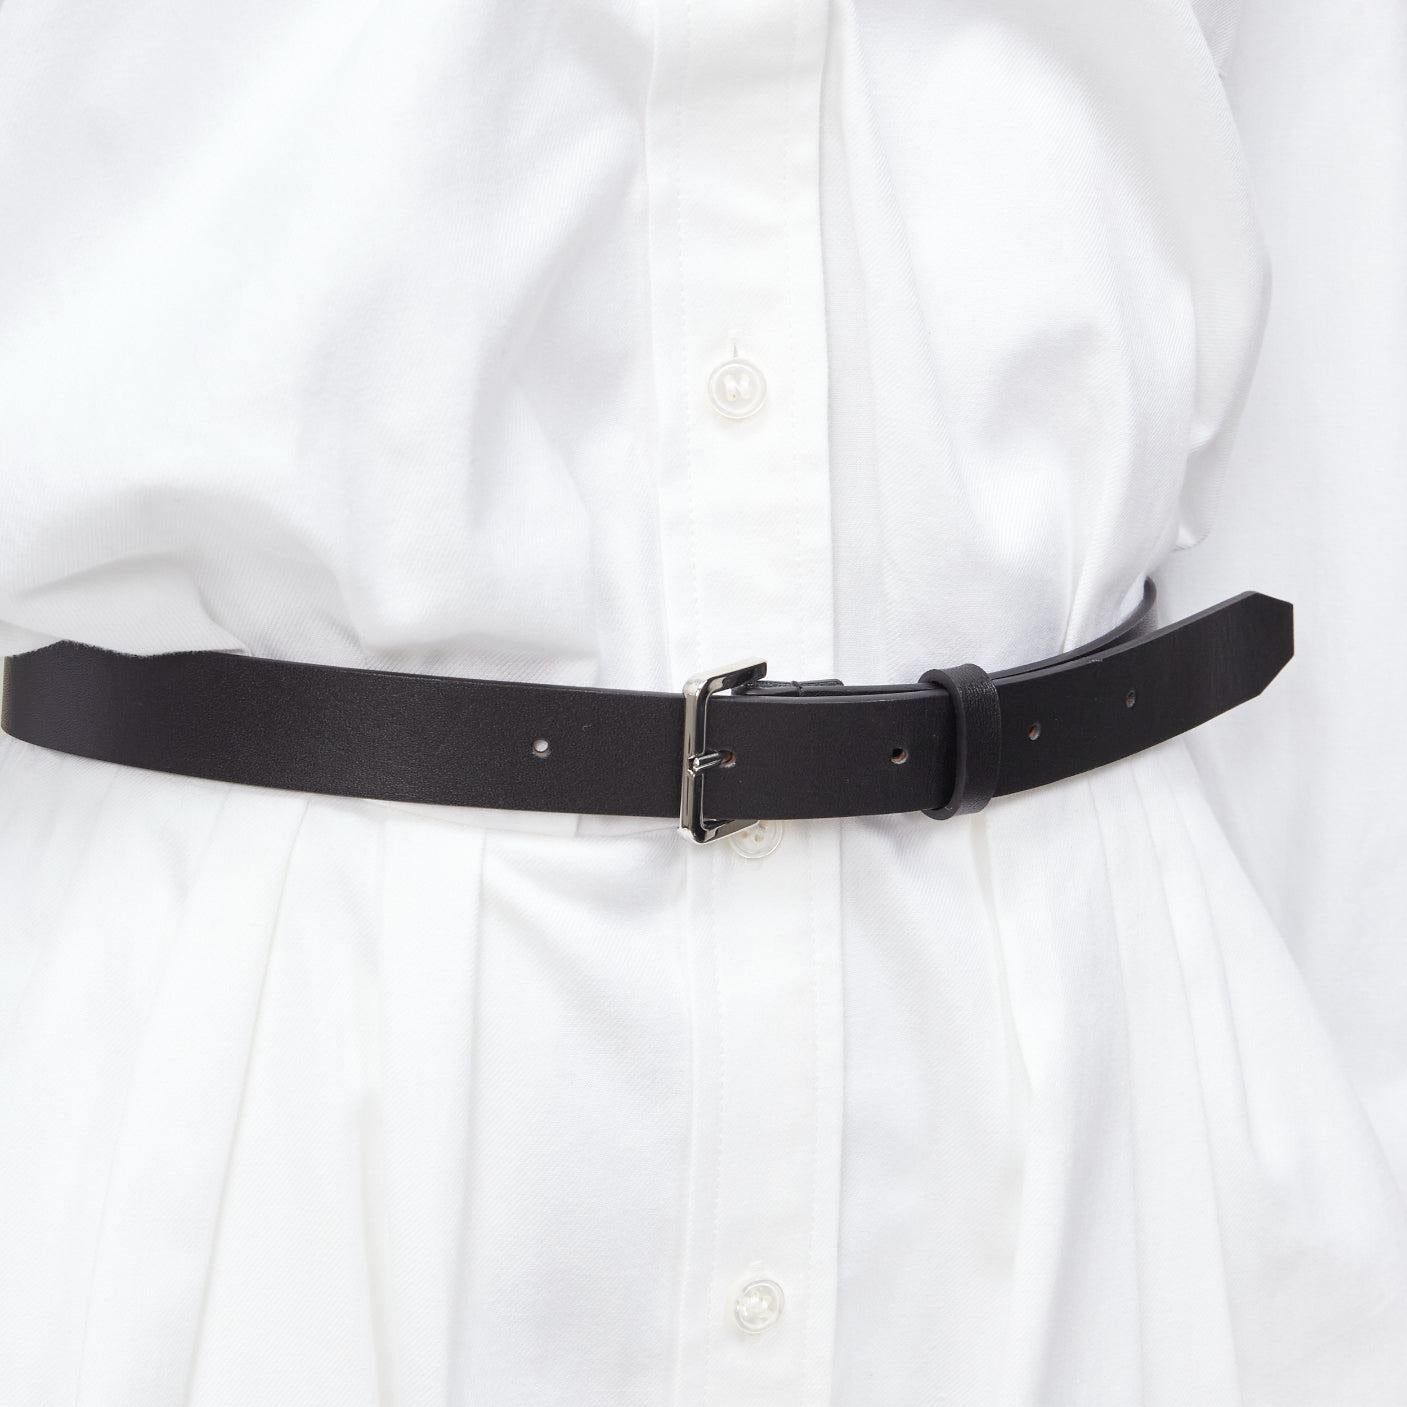 ALEXANDER WANG white nude cotton drop shoulder black belted shirt dress US0 XS
Reference: AAWC/A00709
Brand: Alexander Wang
Designer: Alexander Wang
Material: Cotton, Polyamide
Color: White, Black
Pattern: Solid
Closure: Belt
Lining: Nude